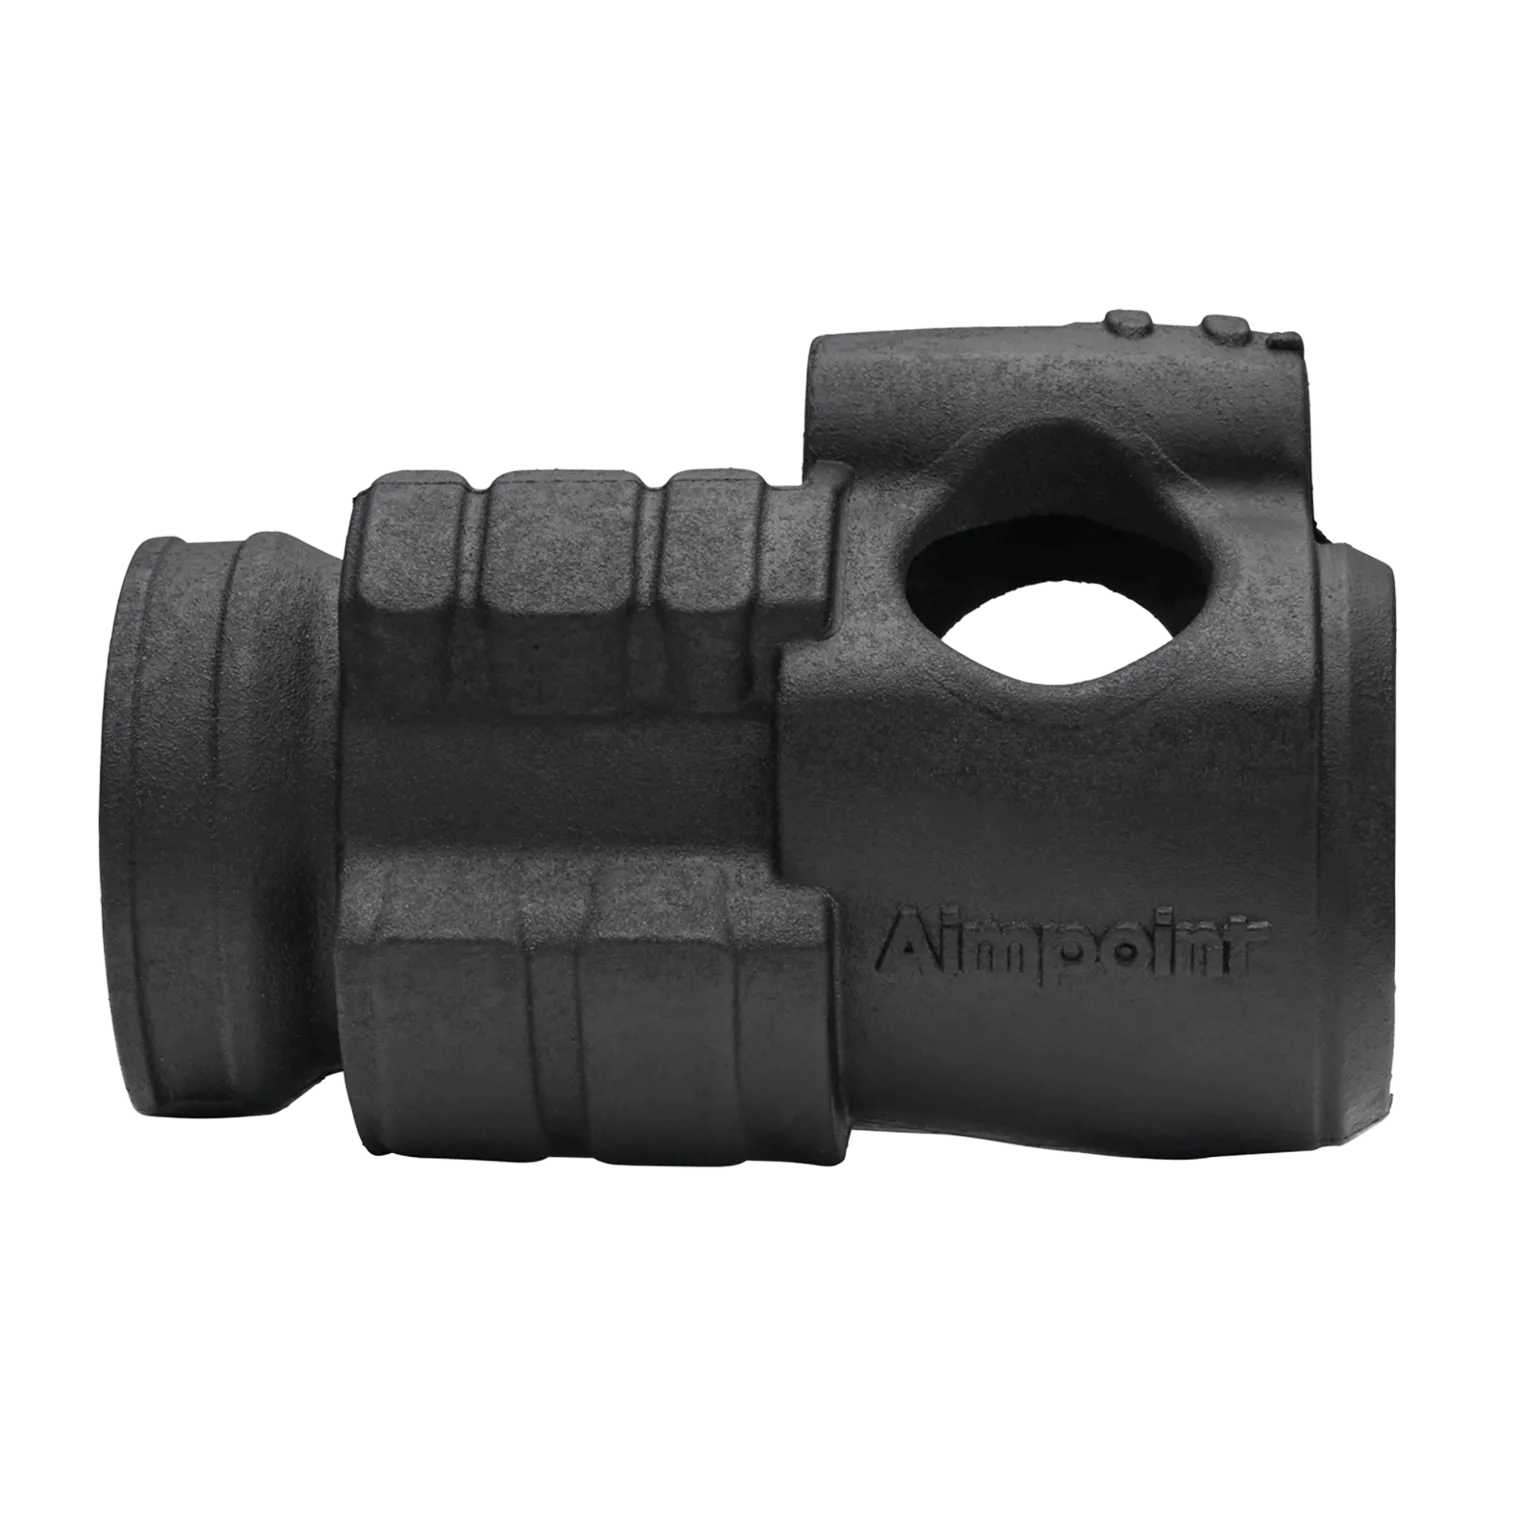 Outer rubber cover - Black for Aimpoint® CompM3/ML3  - 3